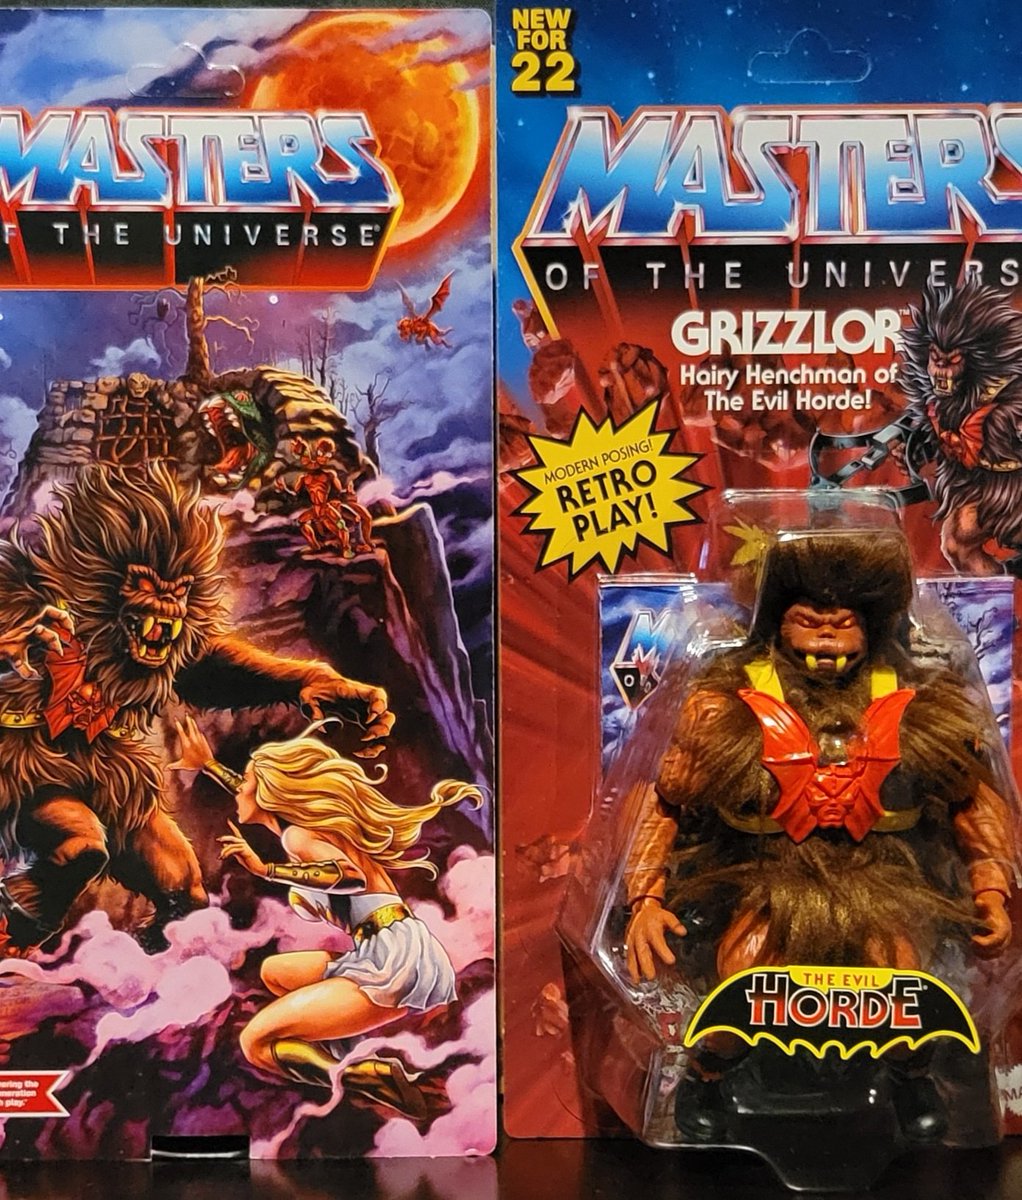 #motuesday Grizzlor has arrived, dressed for the chilly Canadian fall! #motu #mastersoftheuniverse